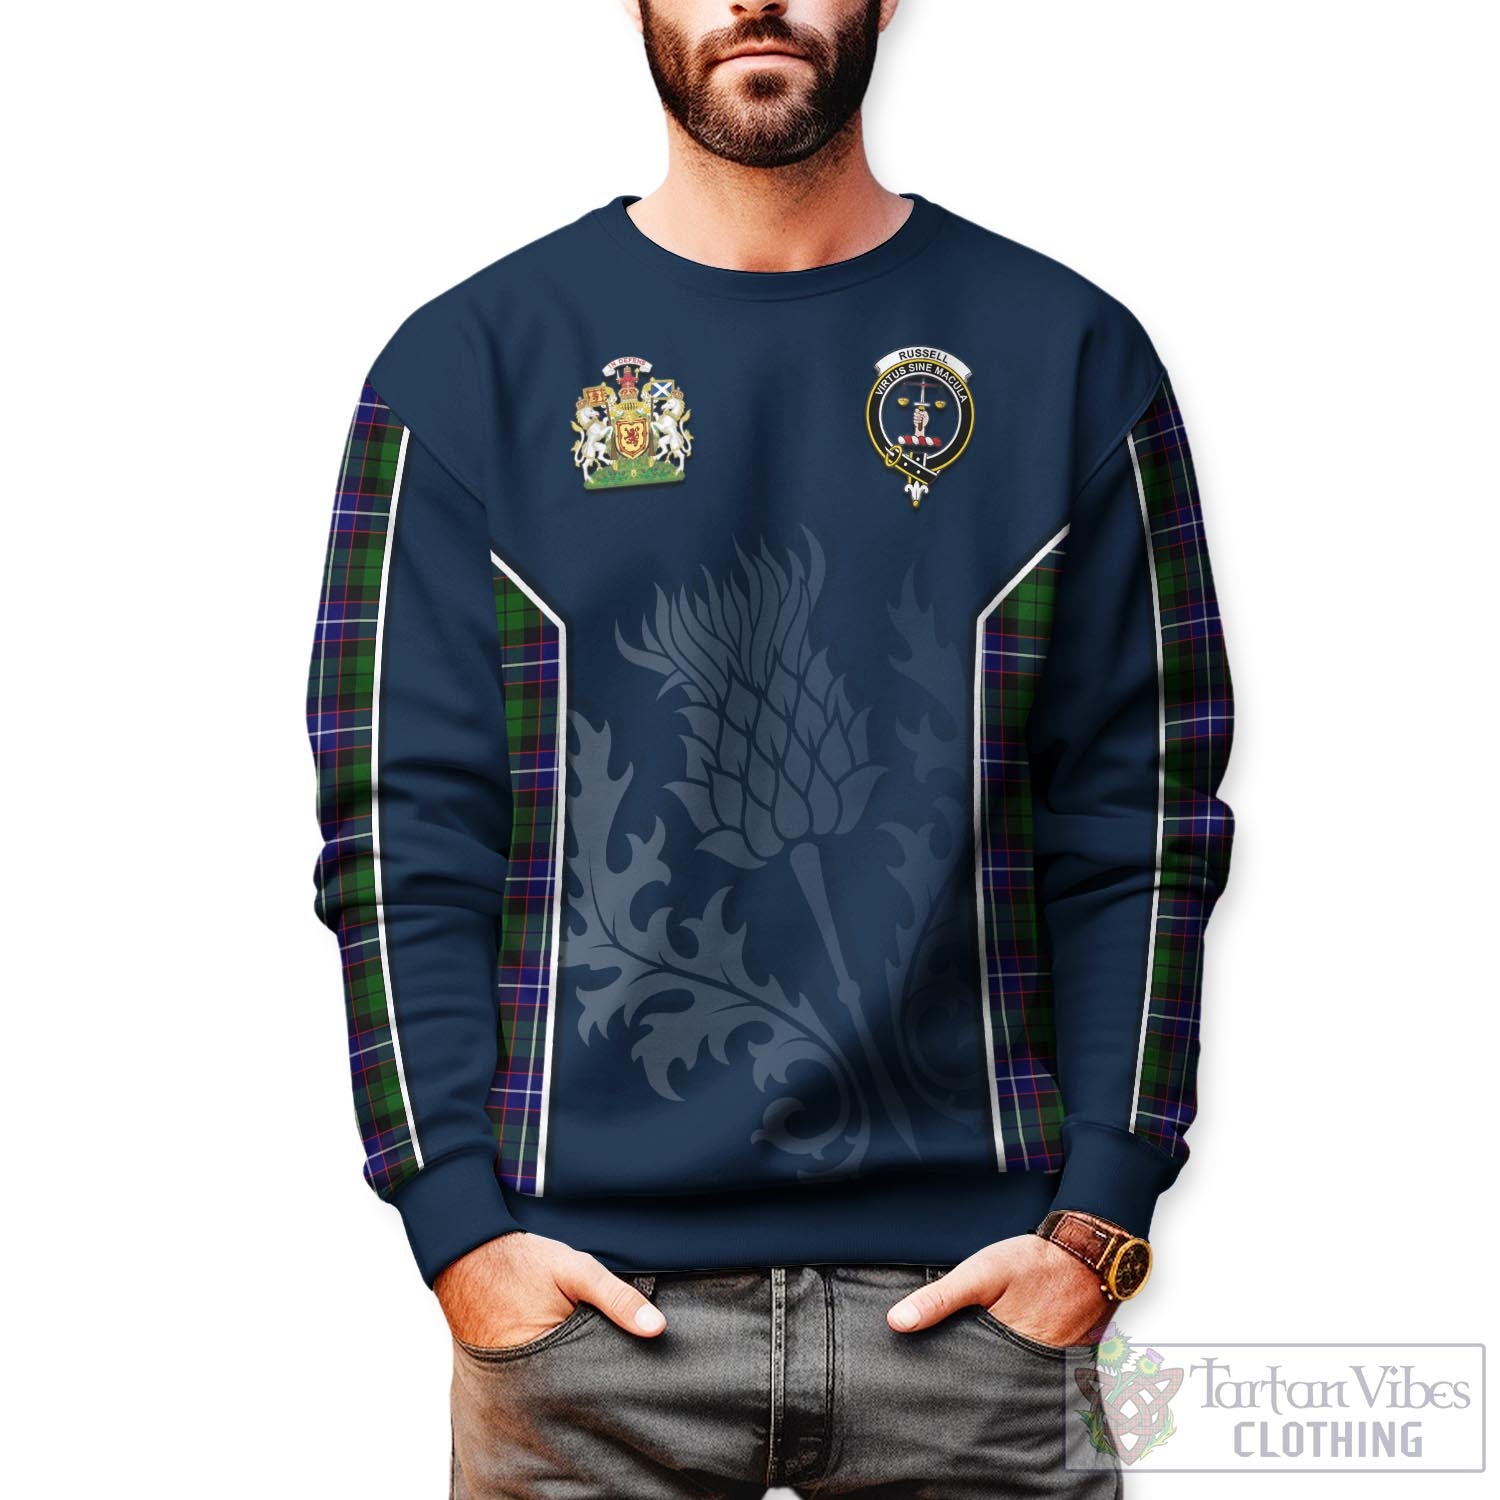 Tartan Vibes Clothing Russell Modern Tartan Sweatshirt with Family Crest and Scottish Thistle Vibes Sport Style